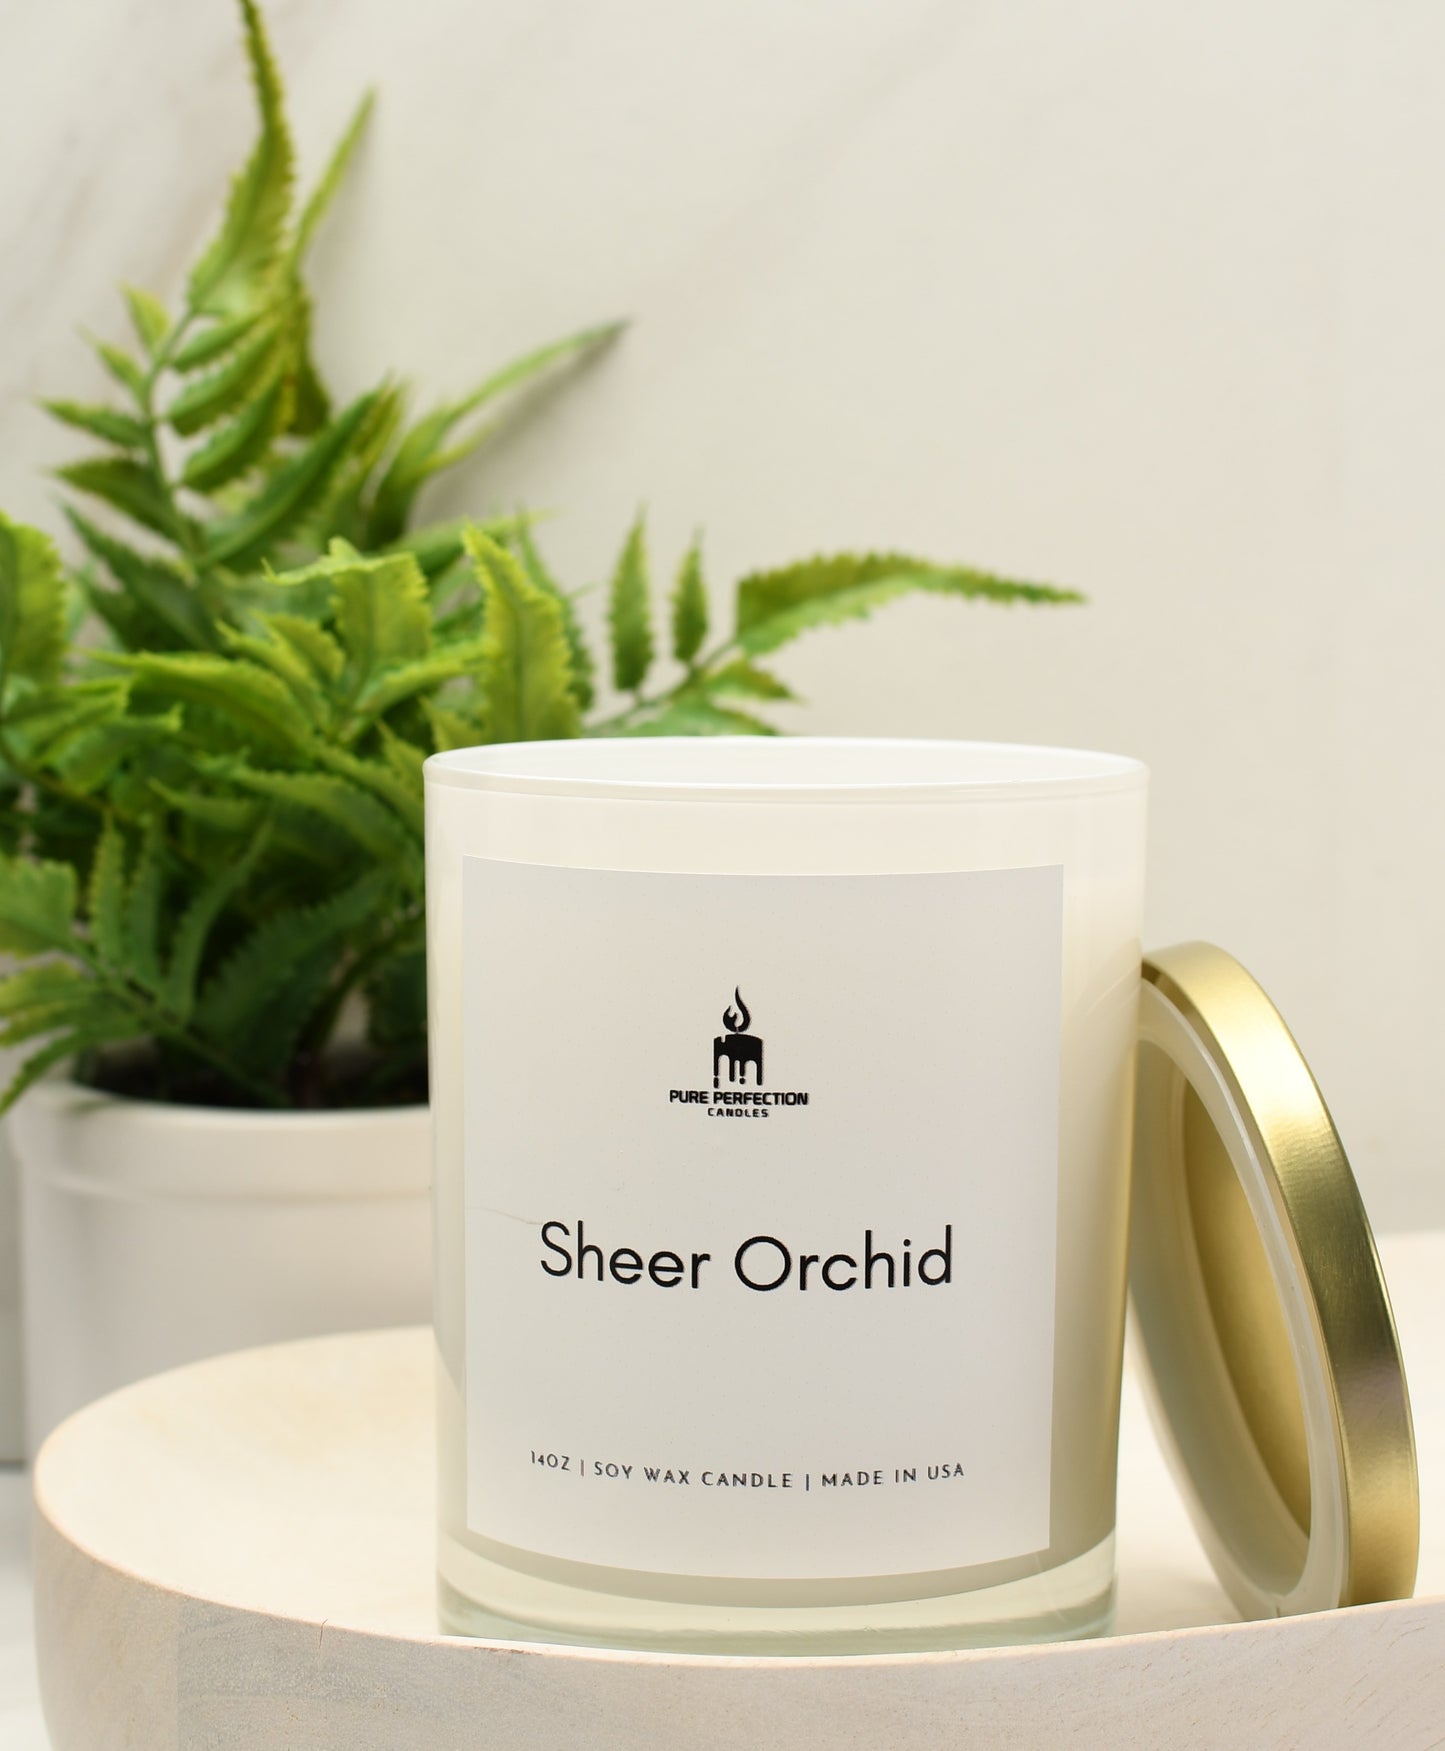 Sheer Orchid